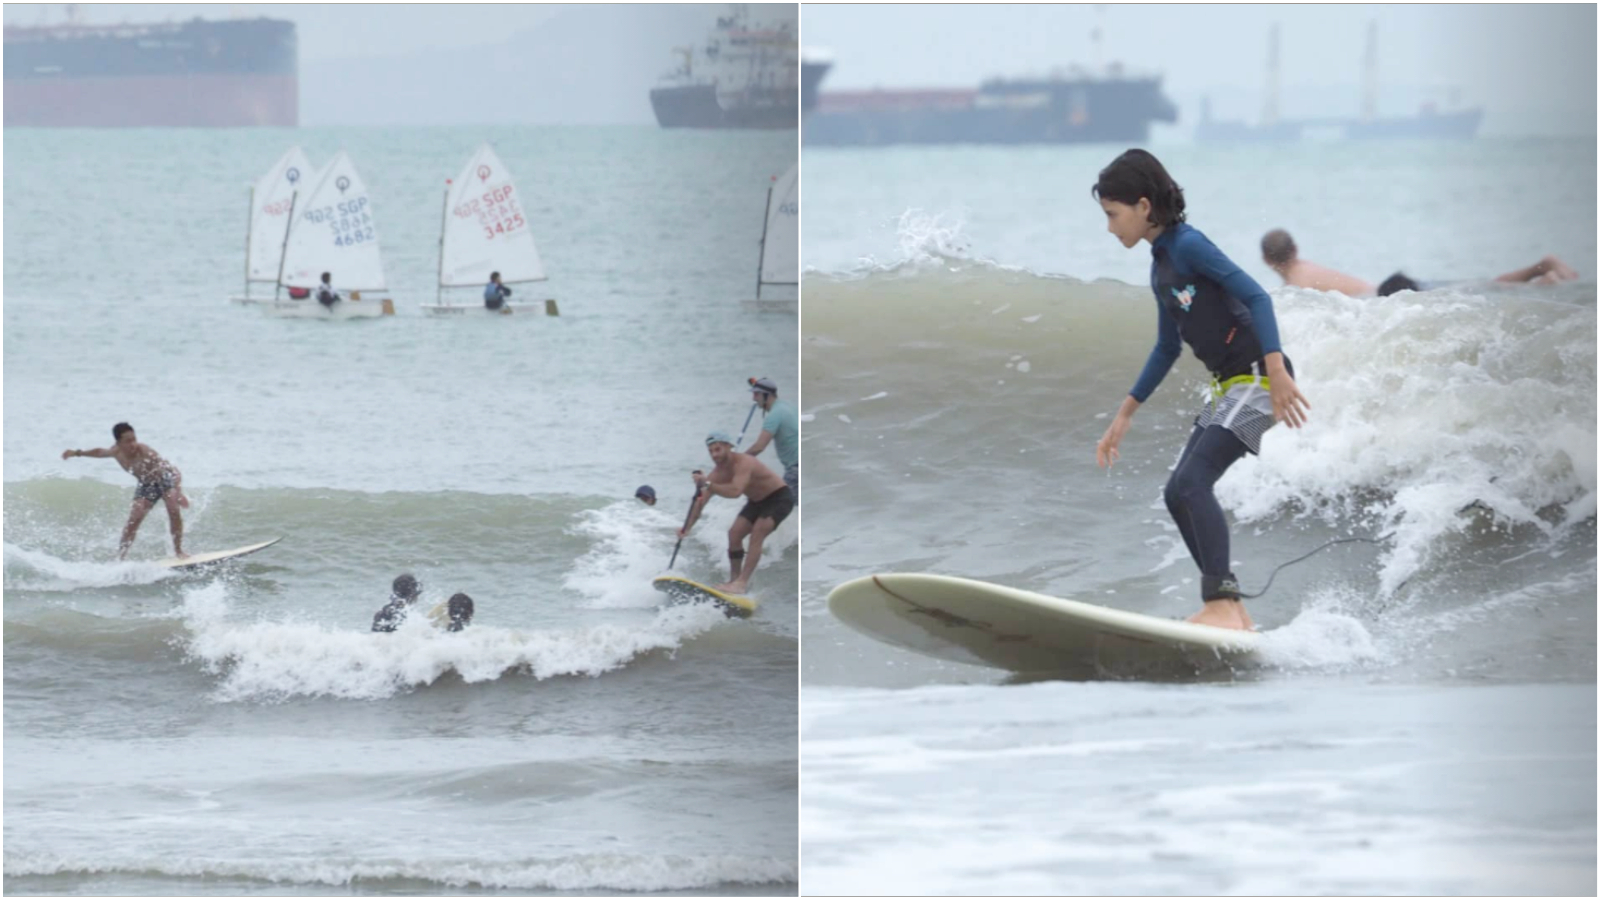 Surfers catch waves Wednesday off the coast from Changi. Photos: Surfgang_photography/Instagram
